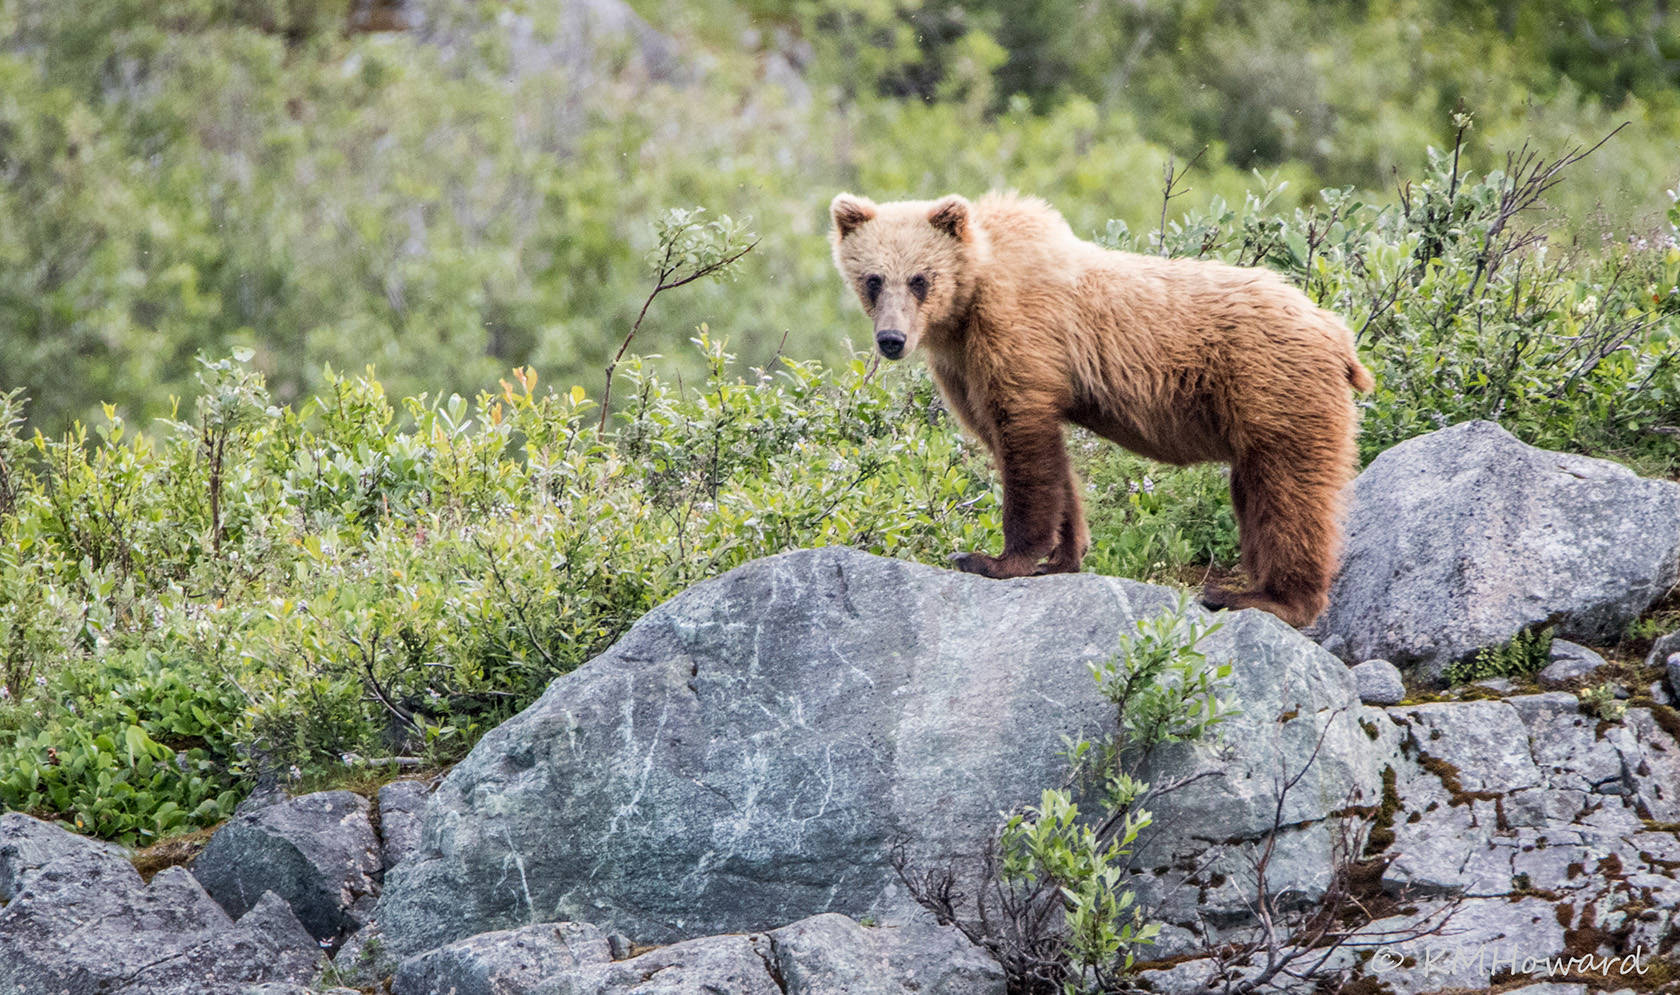 A brown bear poses before disappearing into the brush near Glacier Bay. (Photo by Kerry Howard)